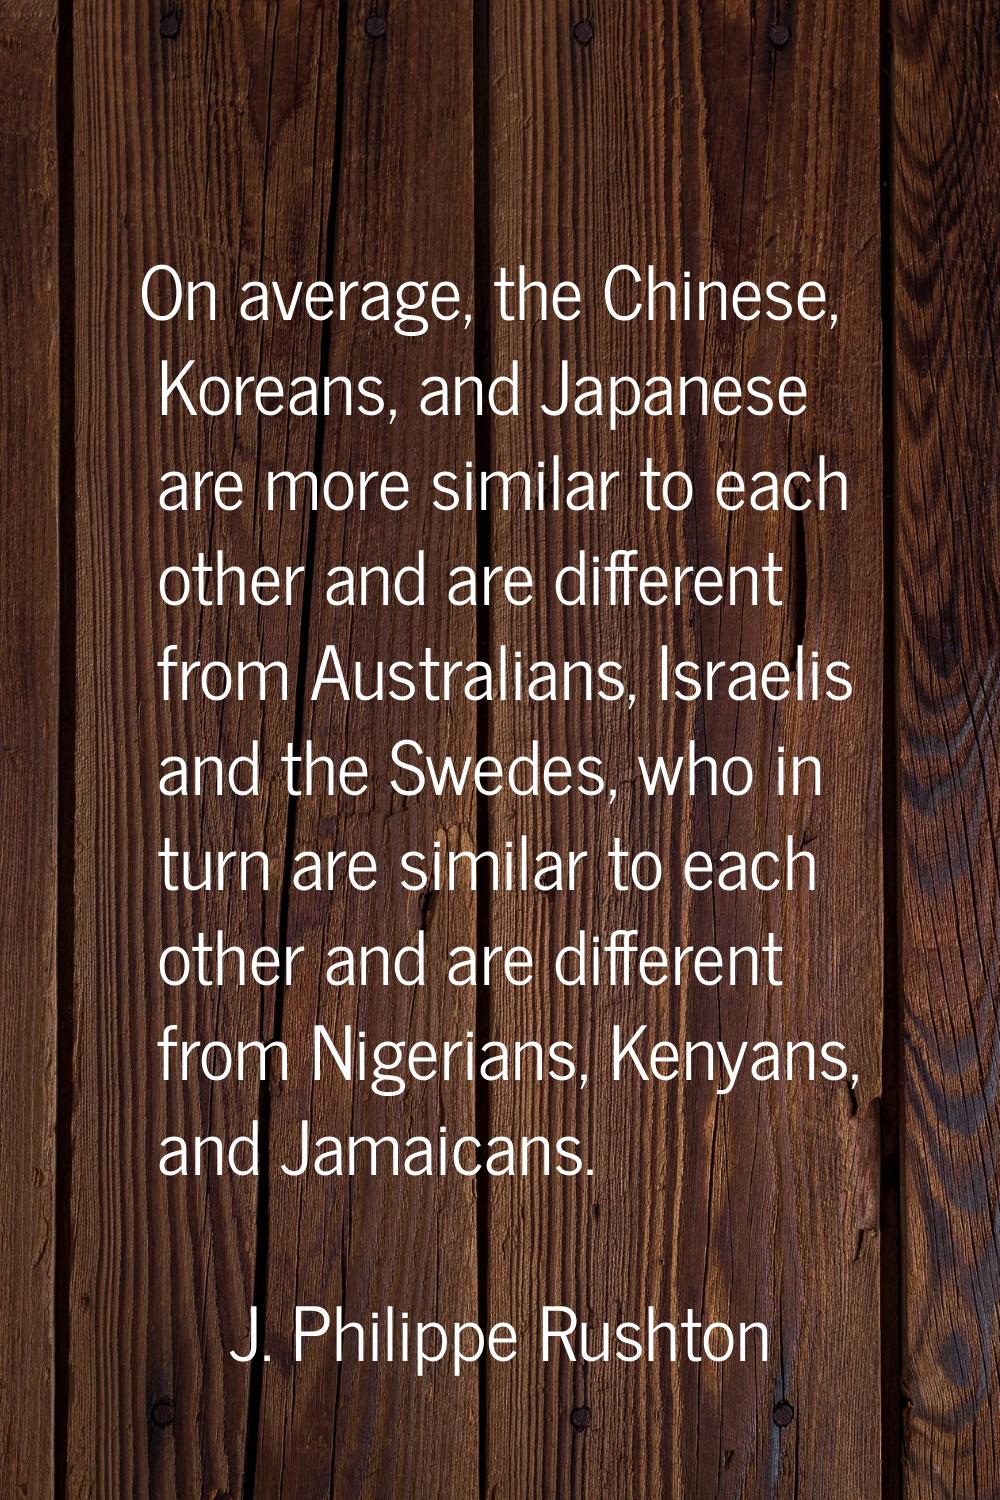 On average, the Chinese, Koreans, and Japanese are more similar to each other and are different fro